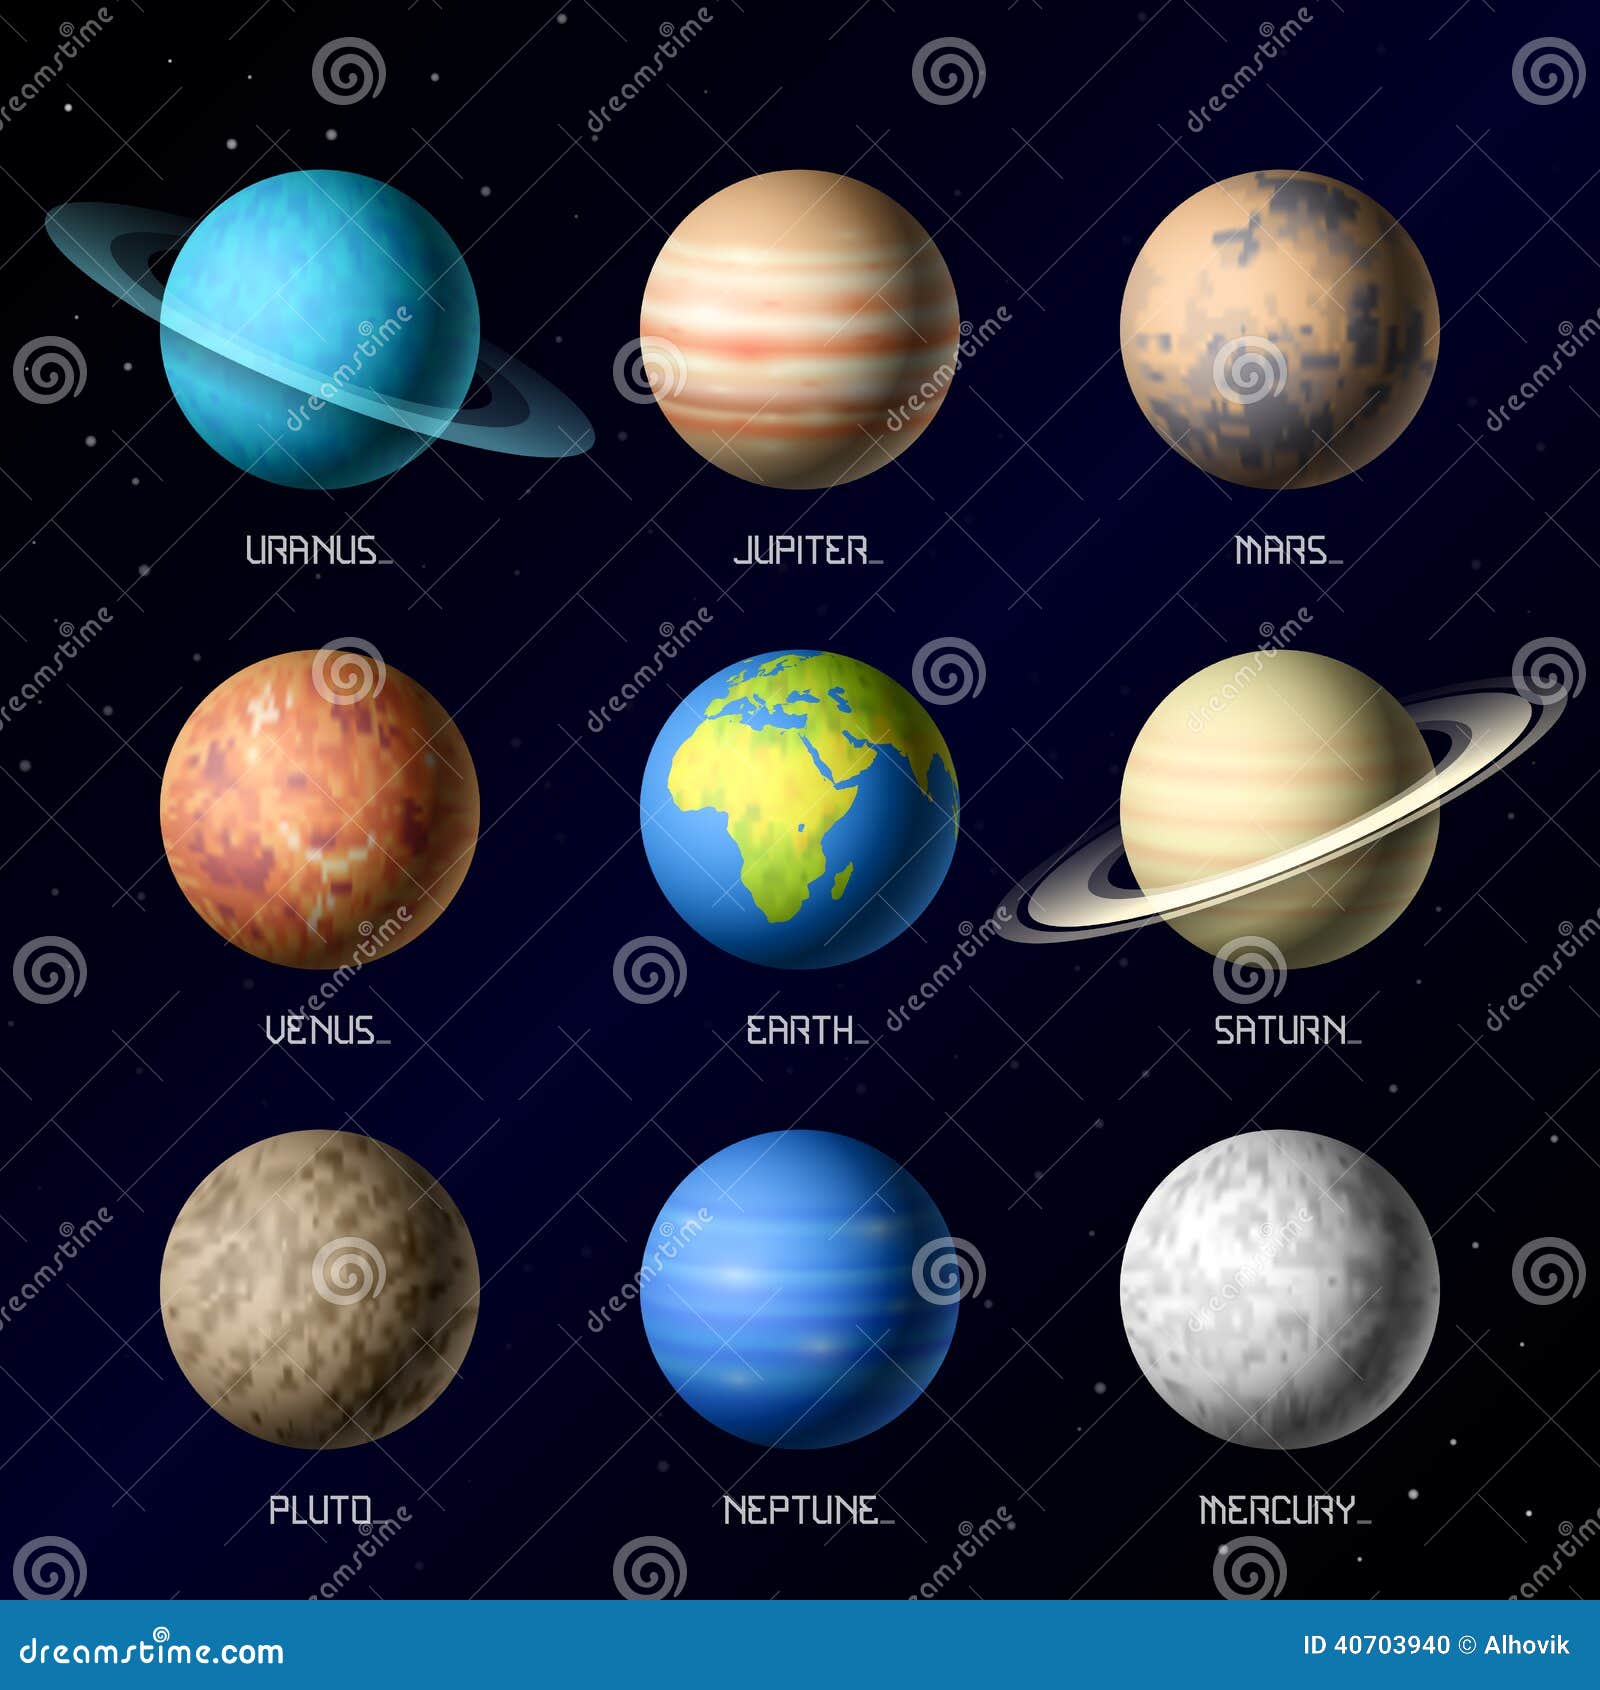 The Planets Of The Solar System Illustration In Original Style